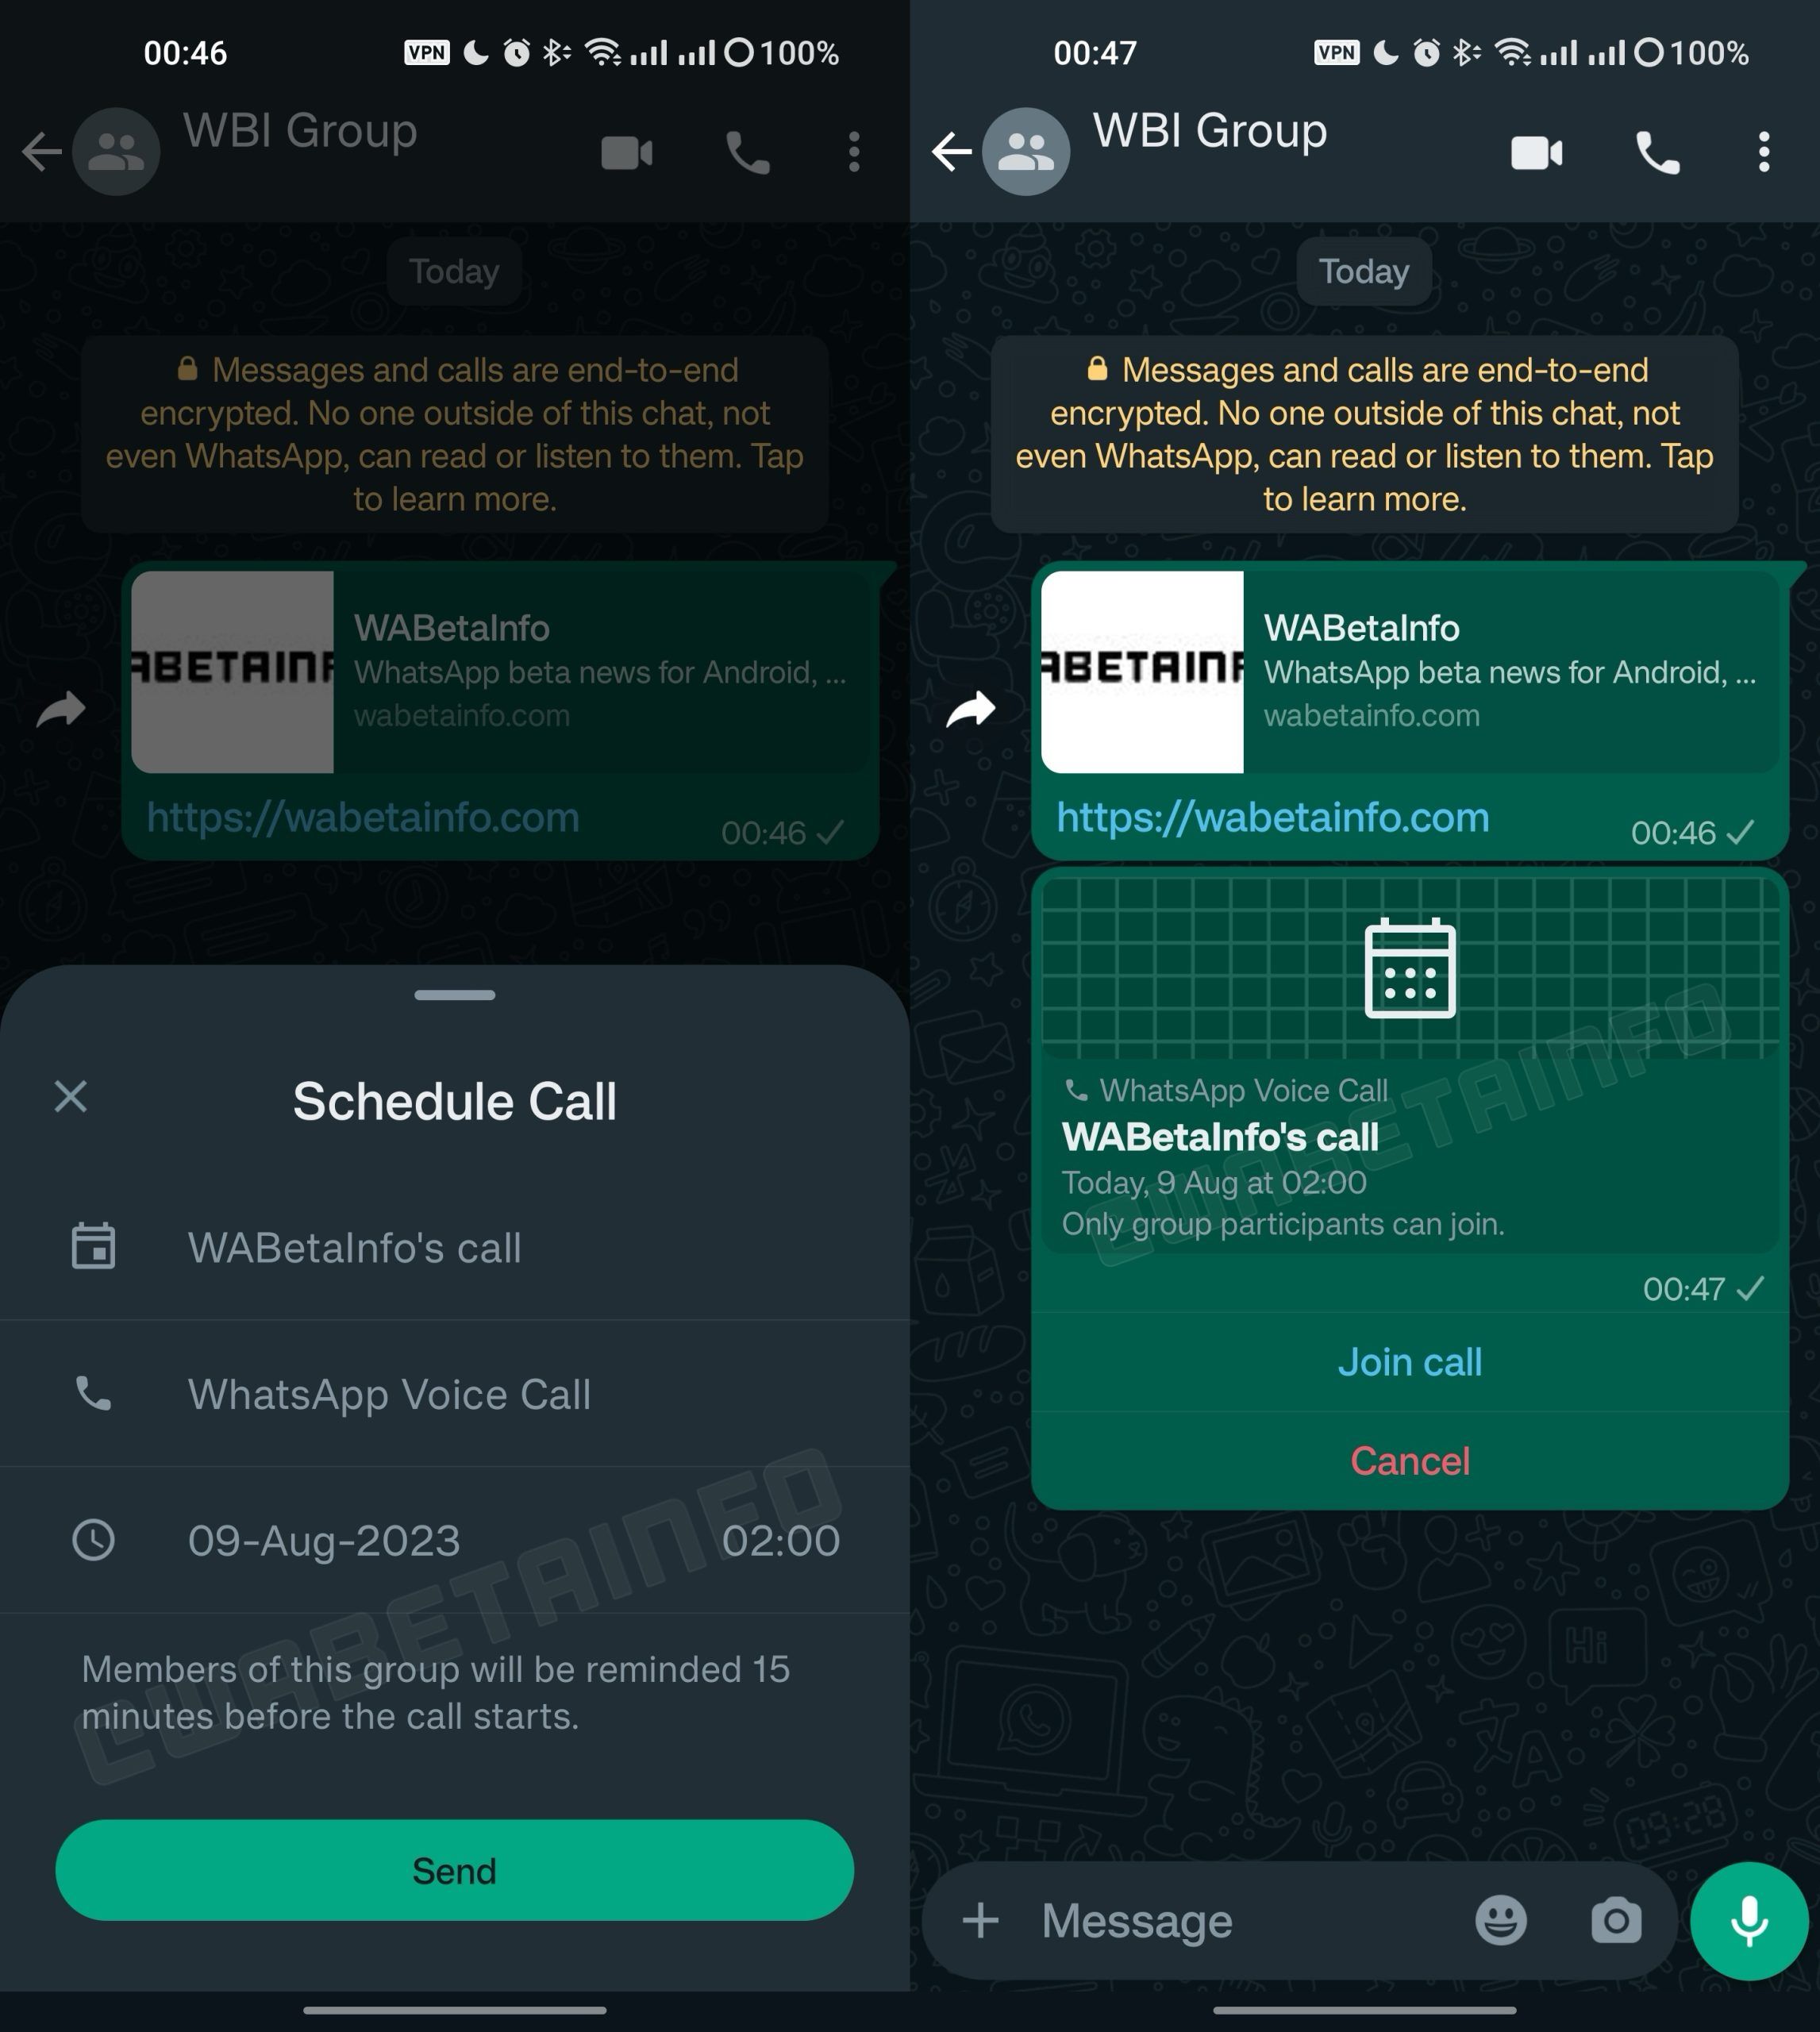 WhatsApp Beta for Android now lets users schedule group calls.